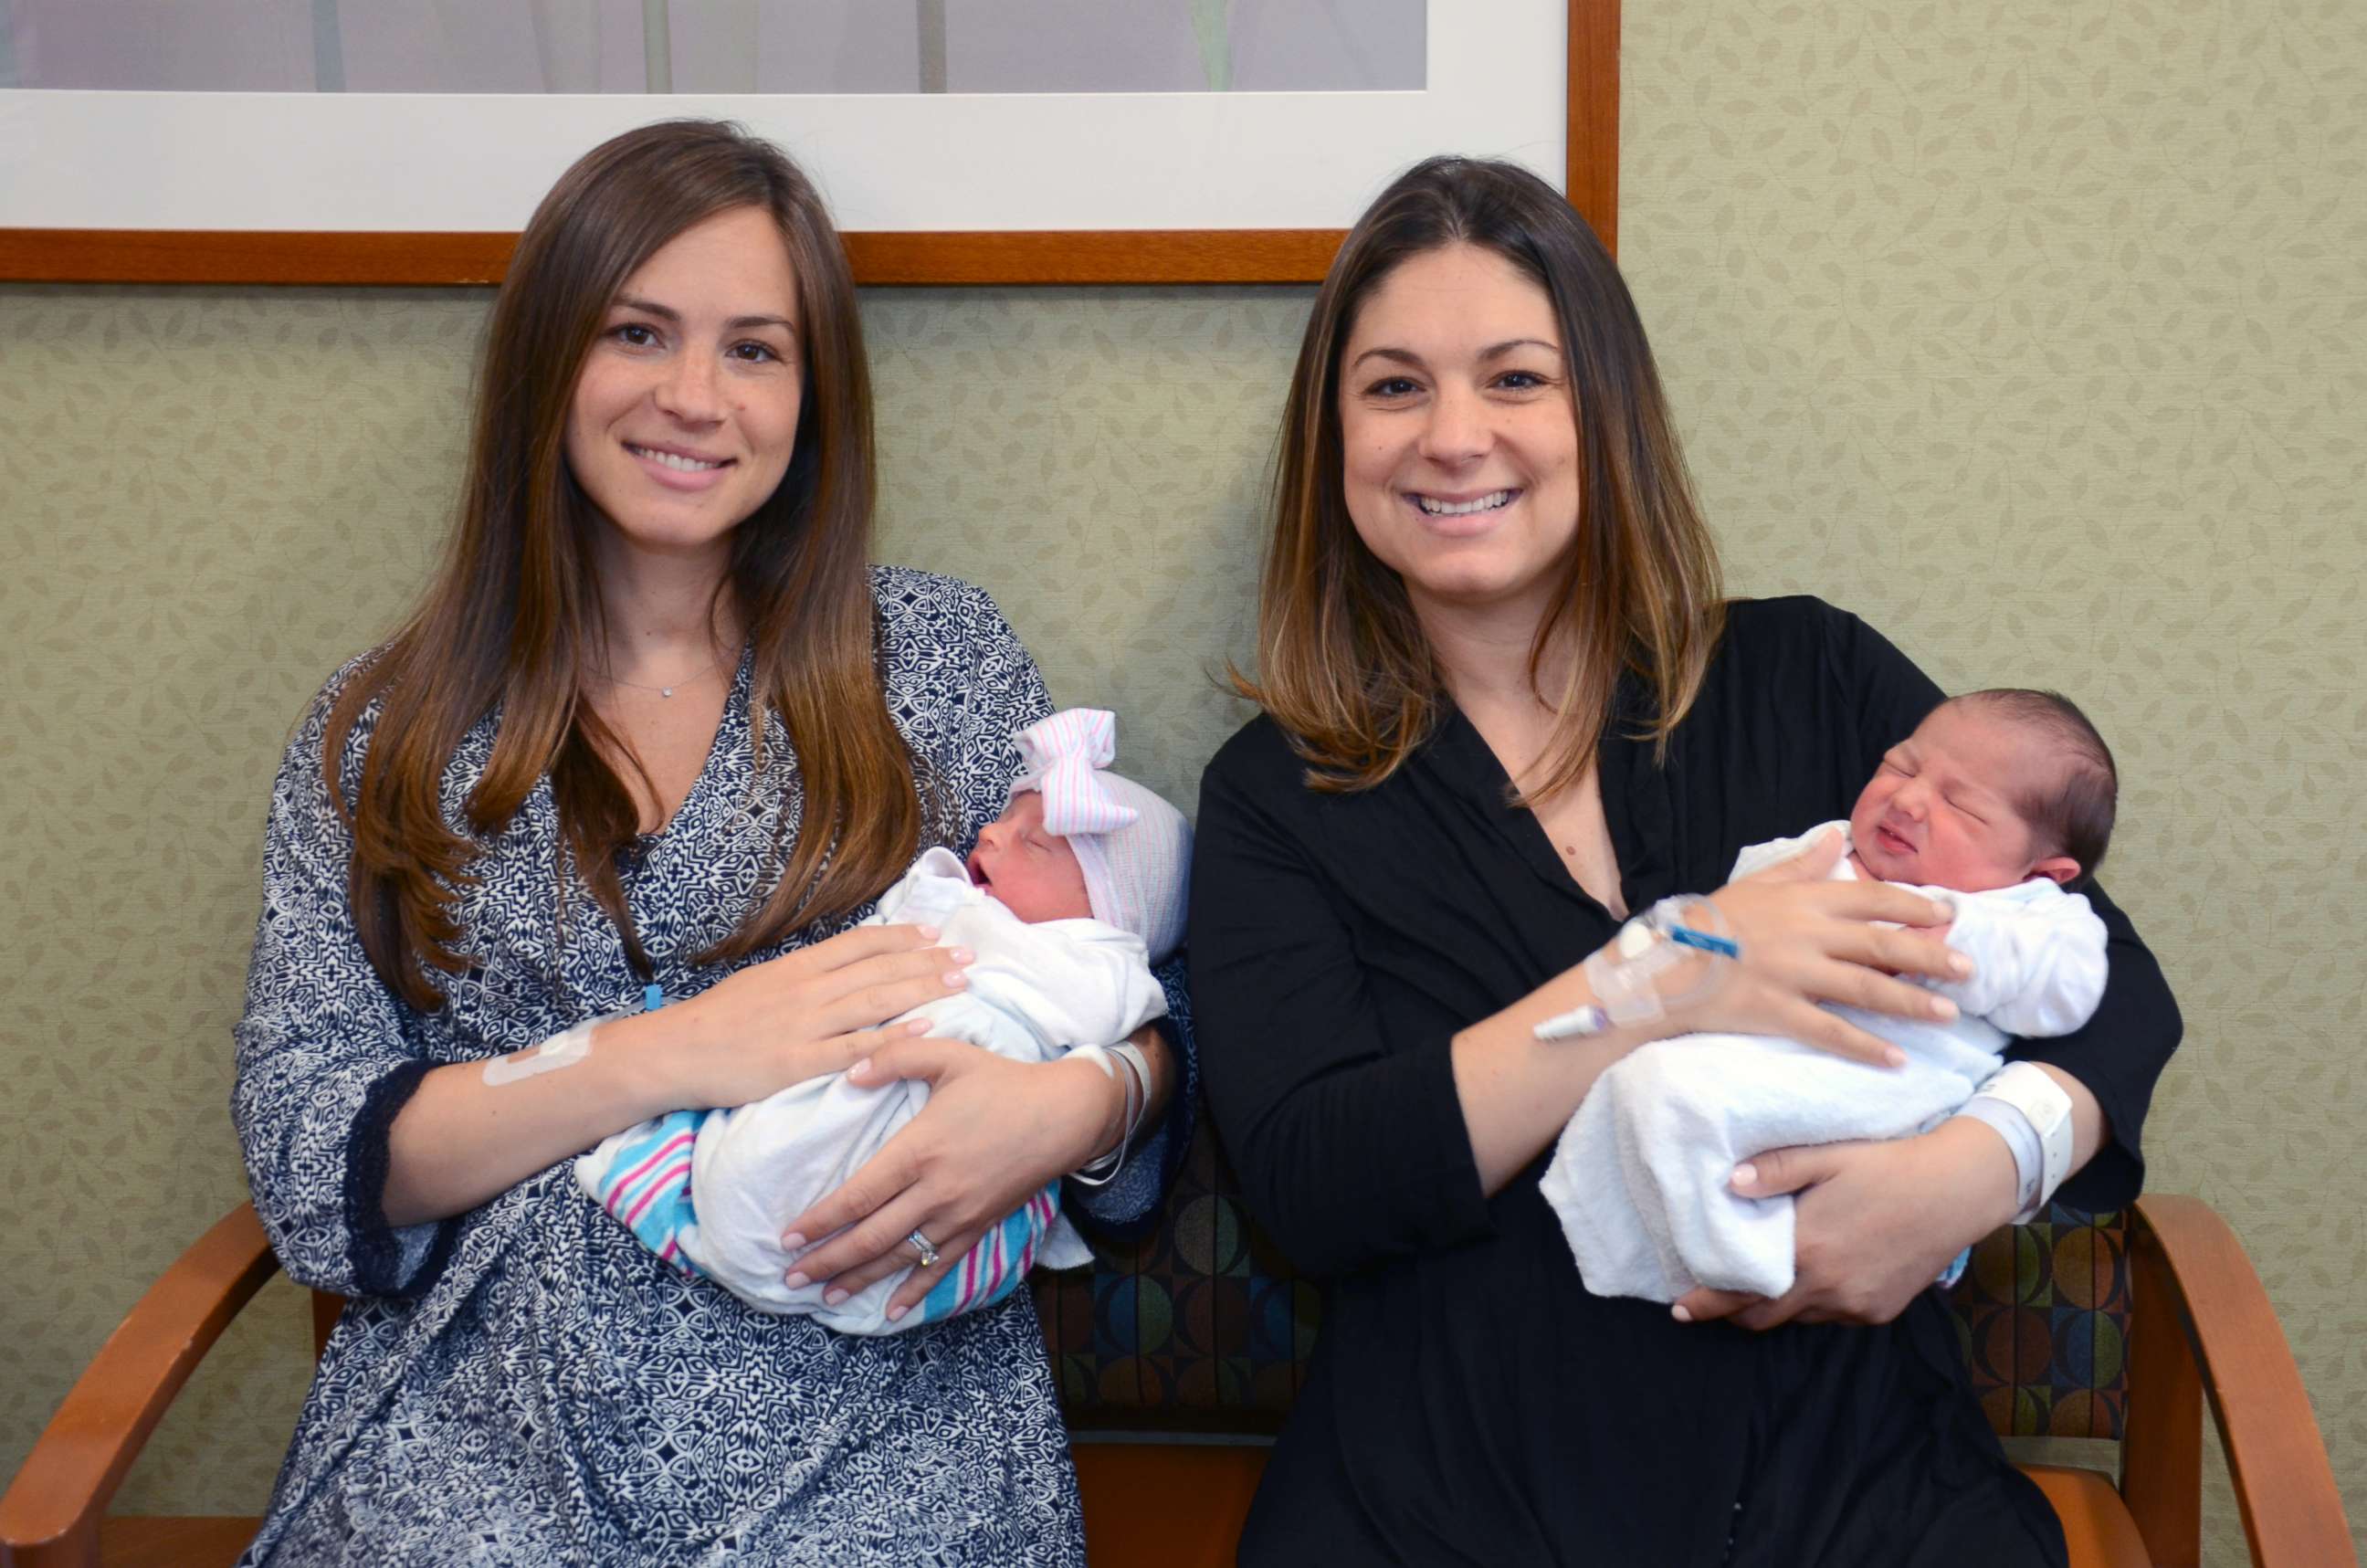 PHOTO: Jessica Lampert, 30, and Kristin Cronin, 34, both gave birth to healthy babies on July 19, 2017.